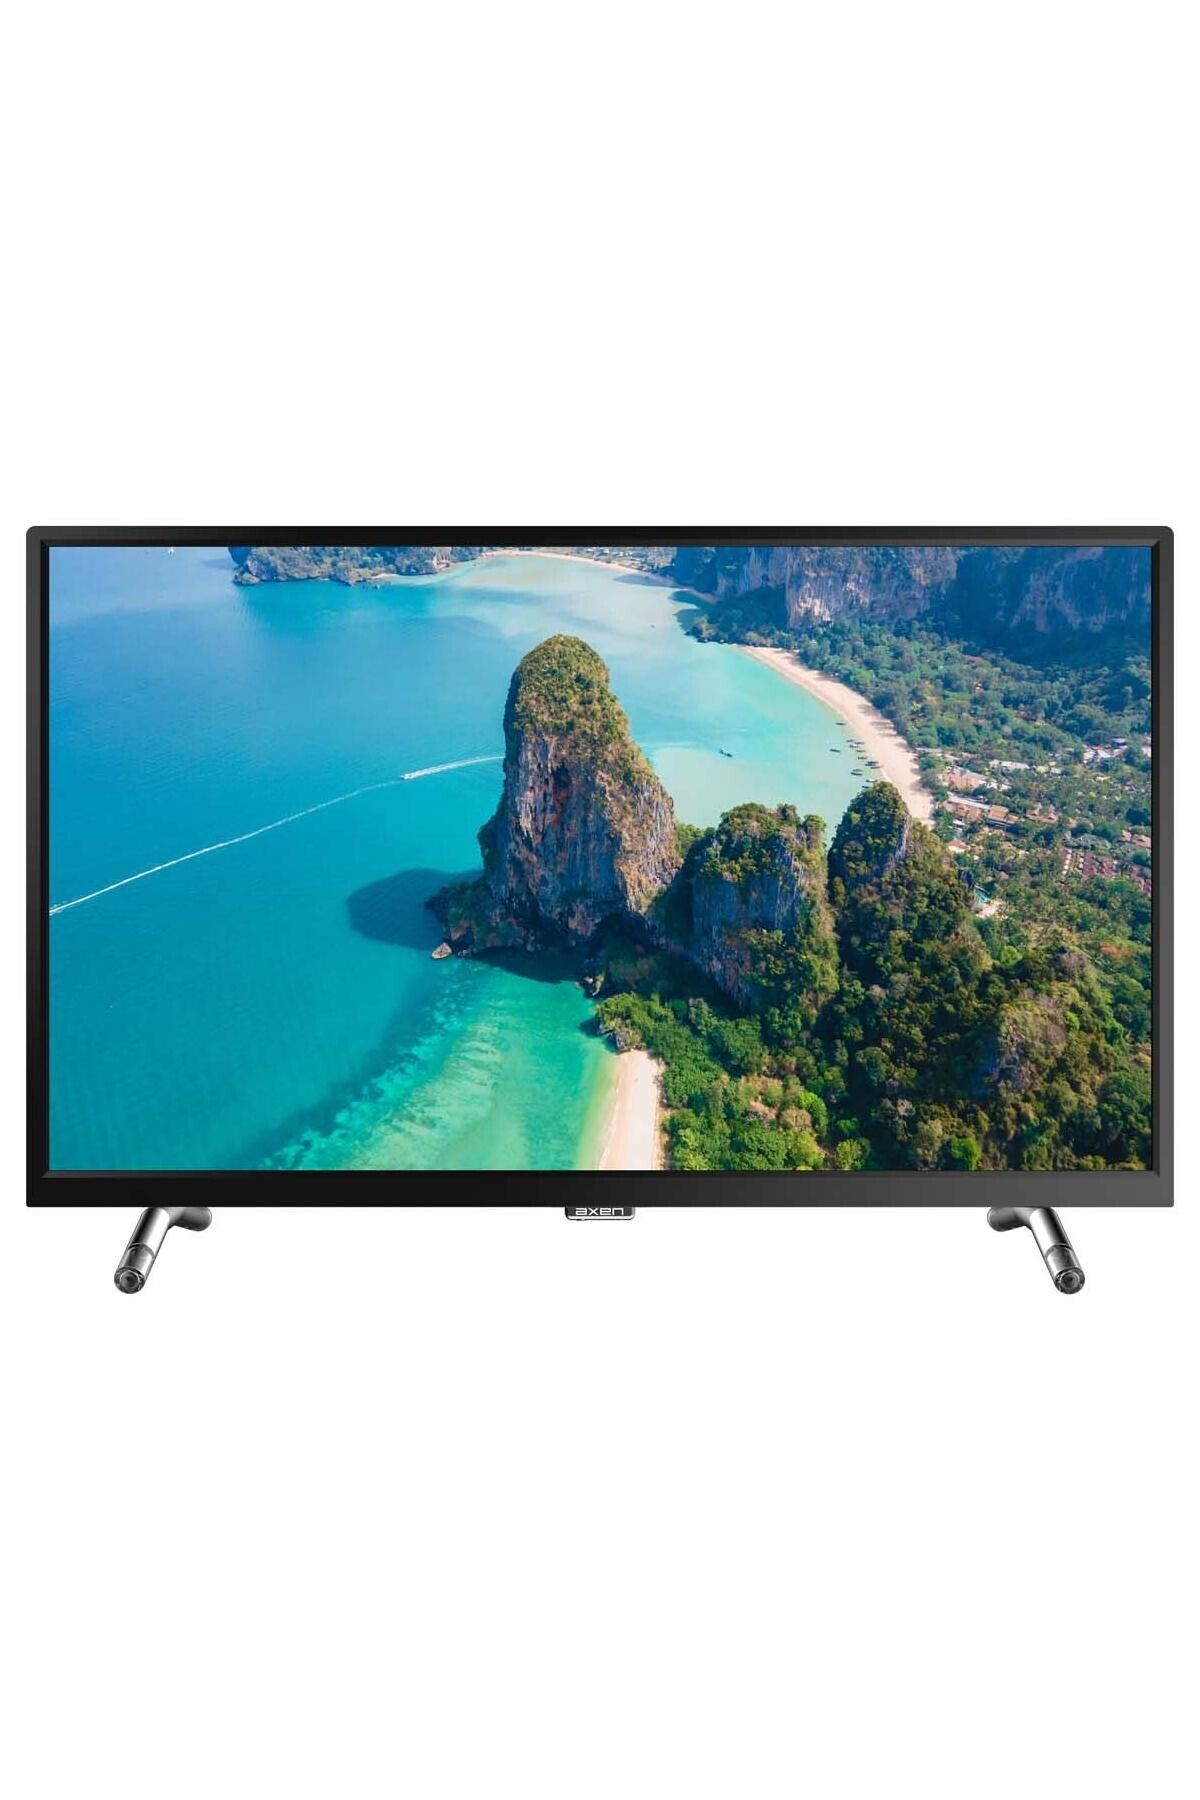 Axen 32'' Ax32dıl13 Hdr Android Smart Uydulu Led Tv